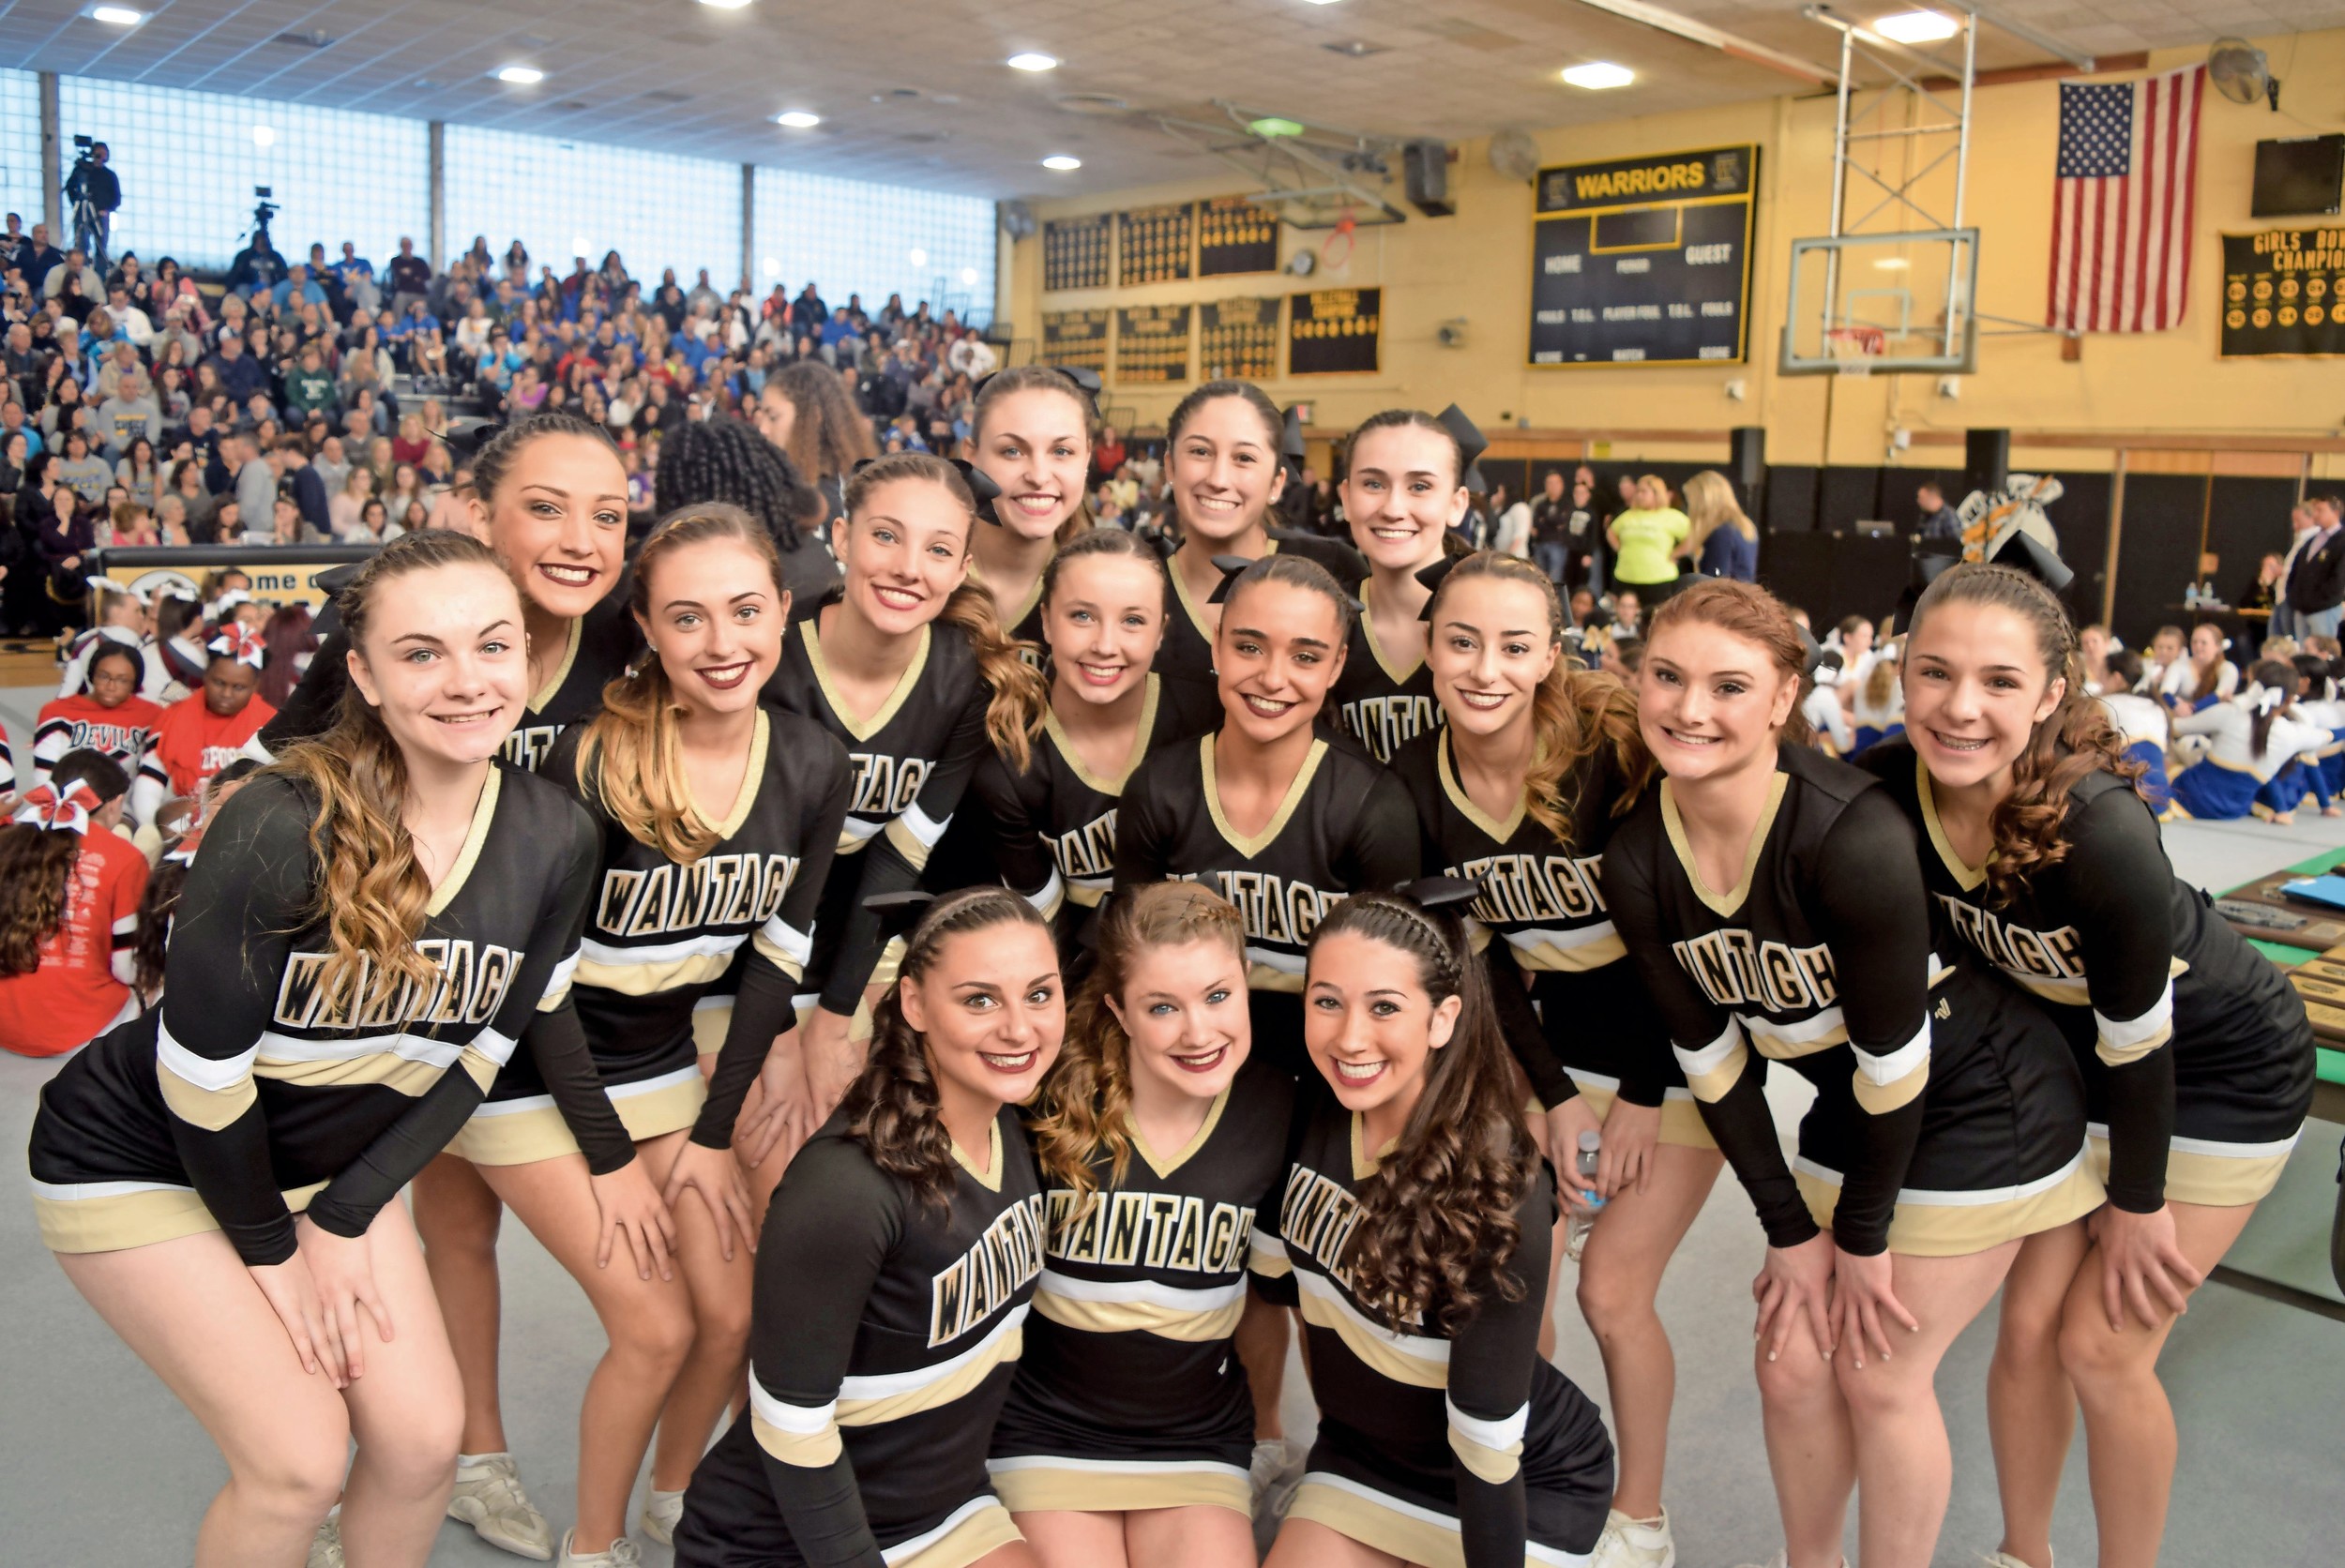 The Wantagh High School cheerleading team took home a county championship on Feb. 26, earning it a spot in the New York State Public High School Athletic Association Cheer Championships this weekend.